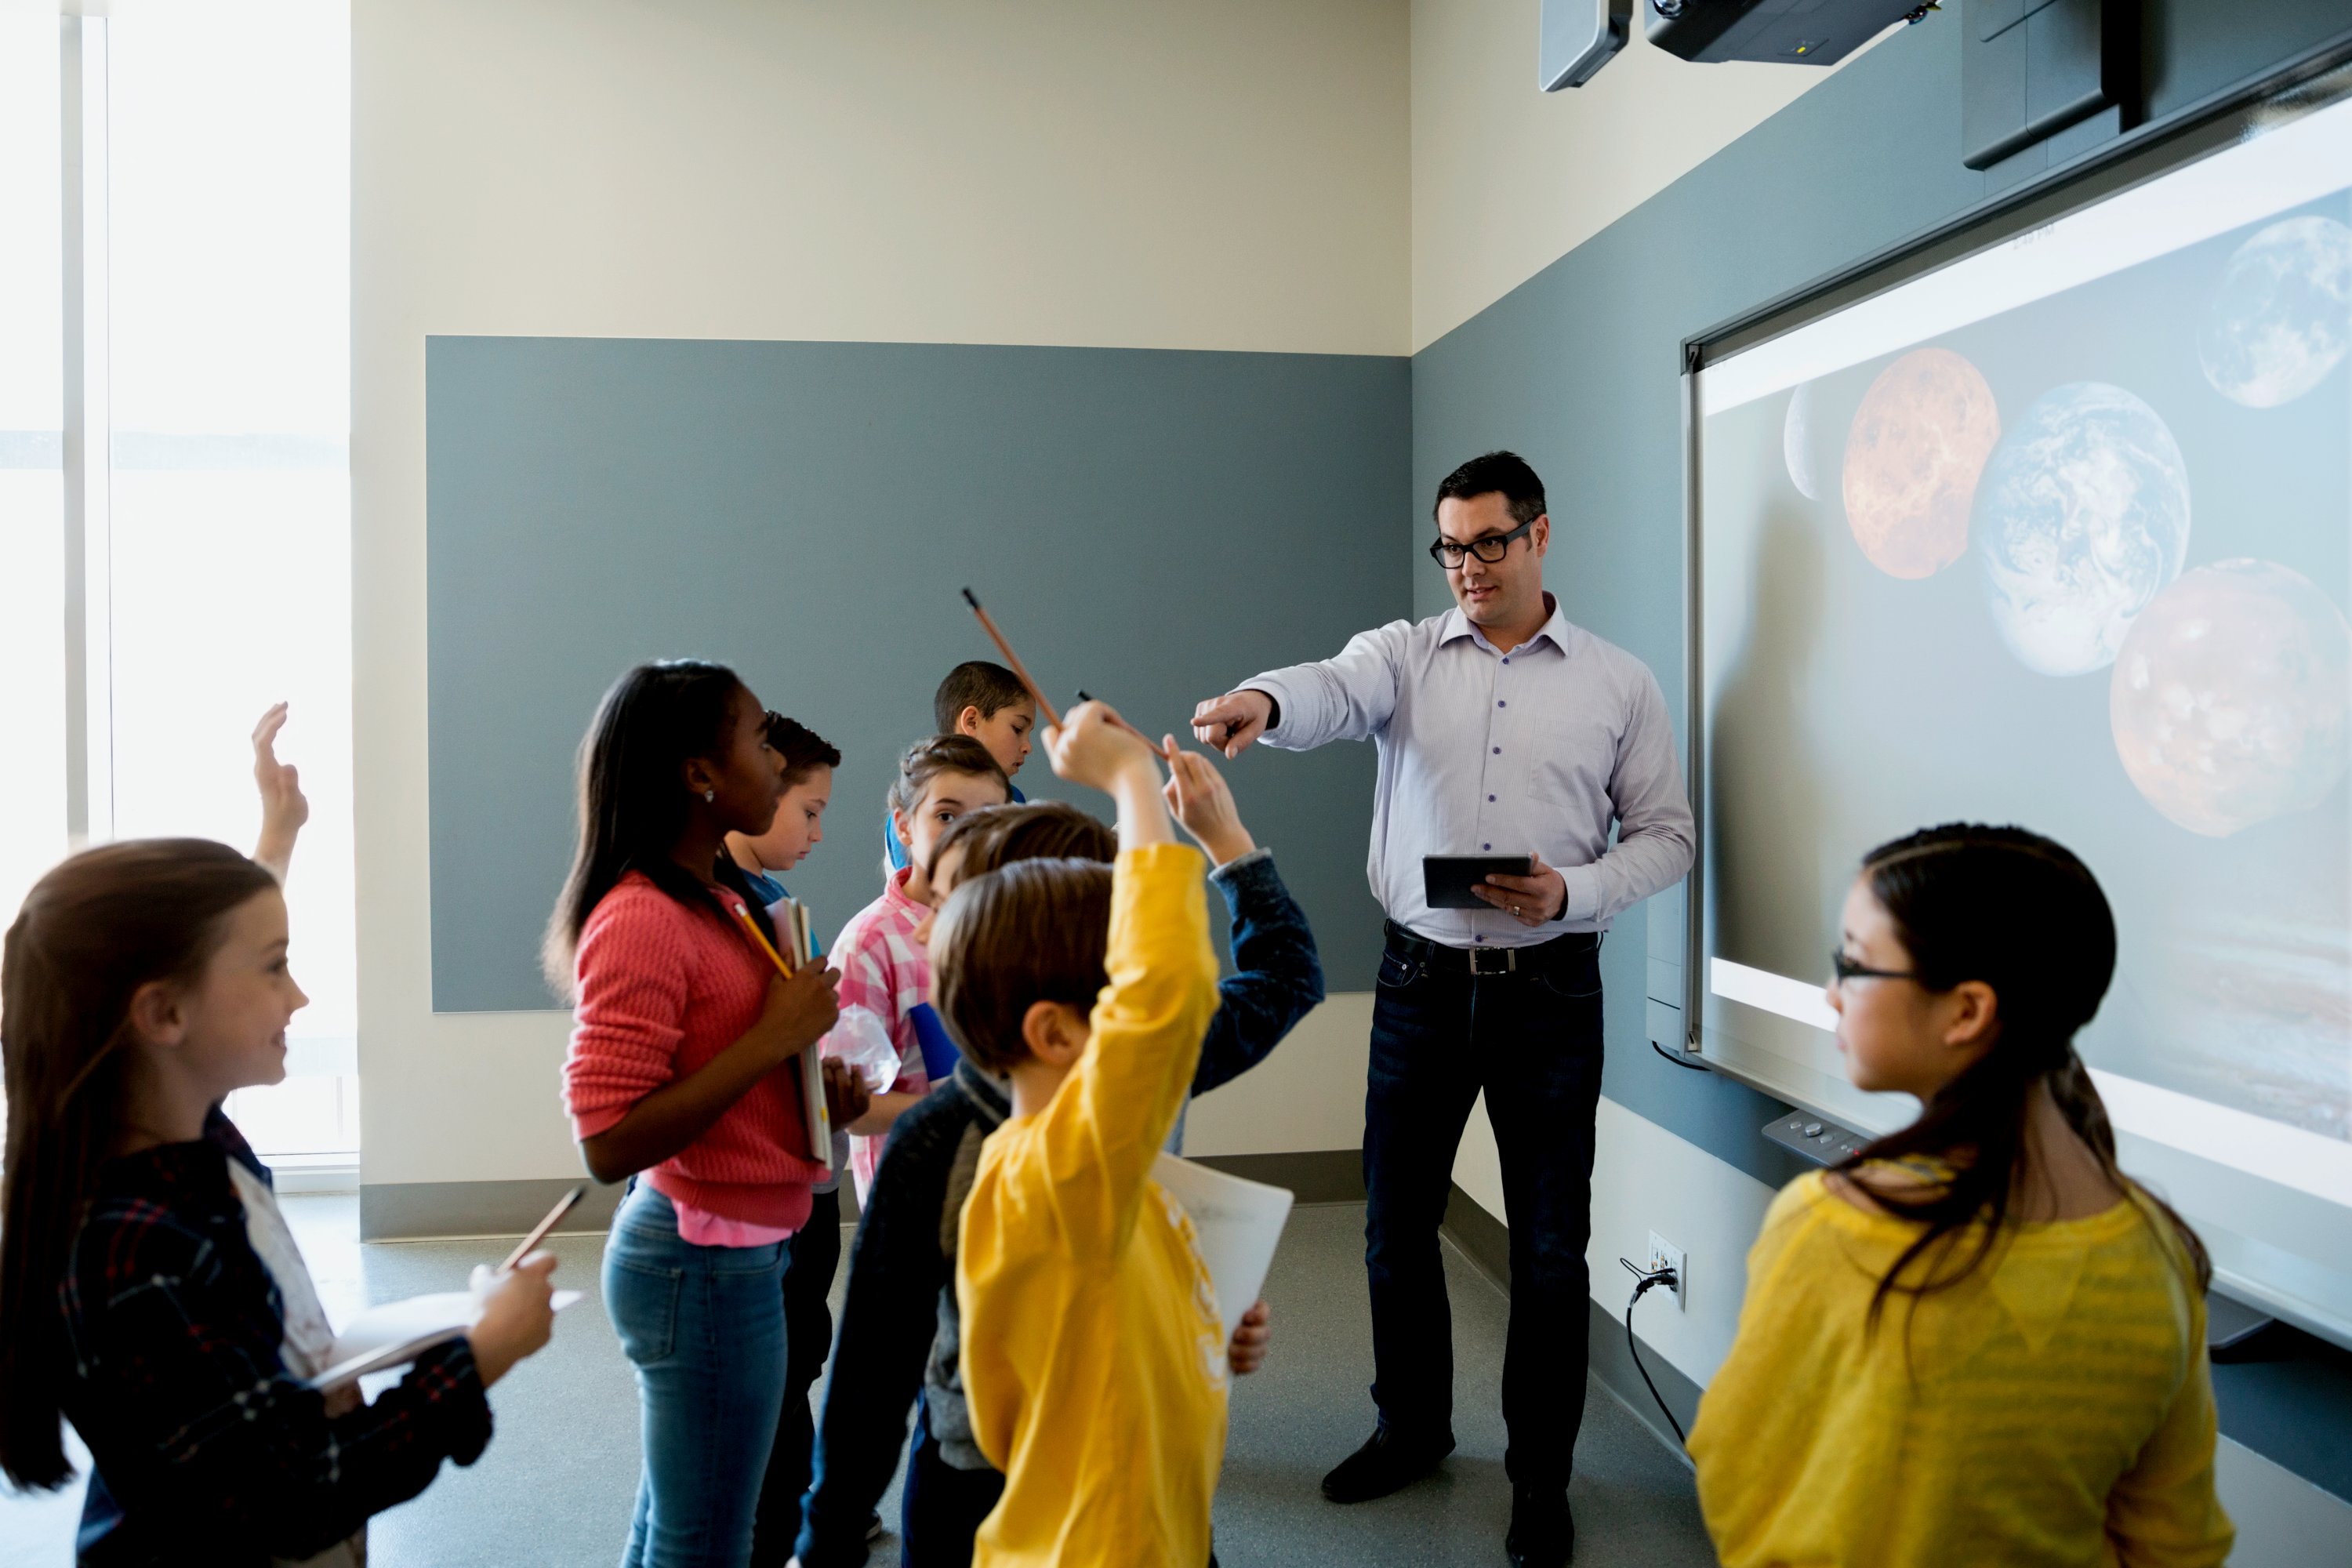 A man teaching a group of seven students around a projector.